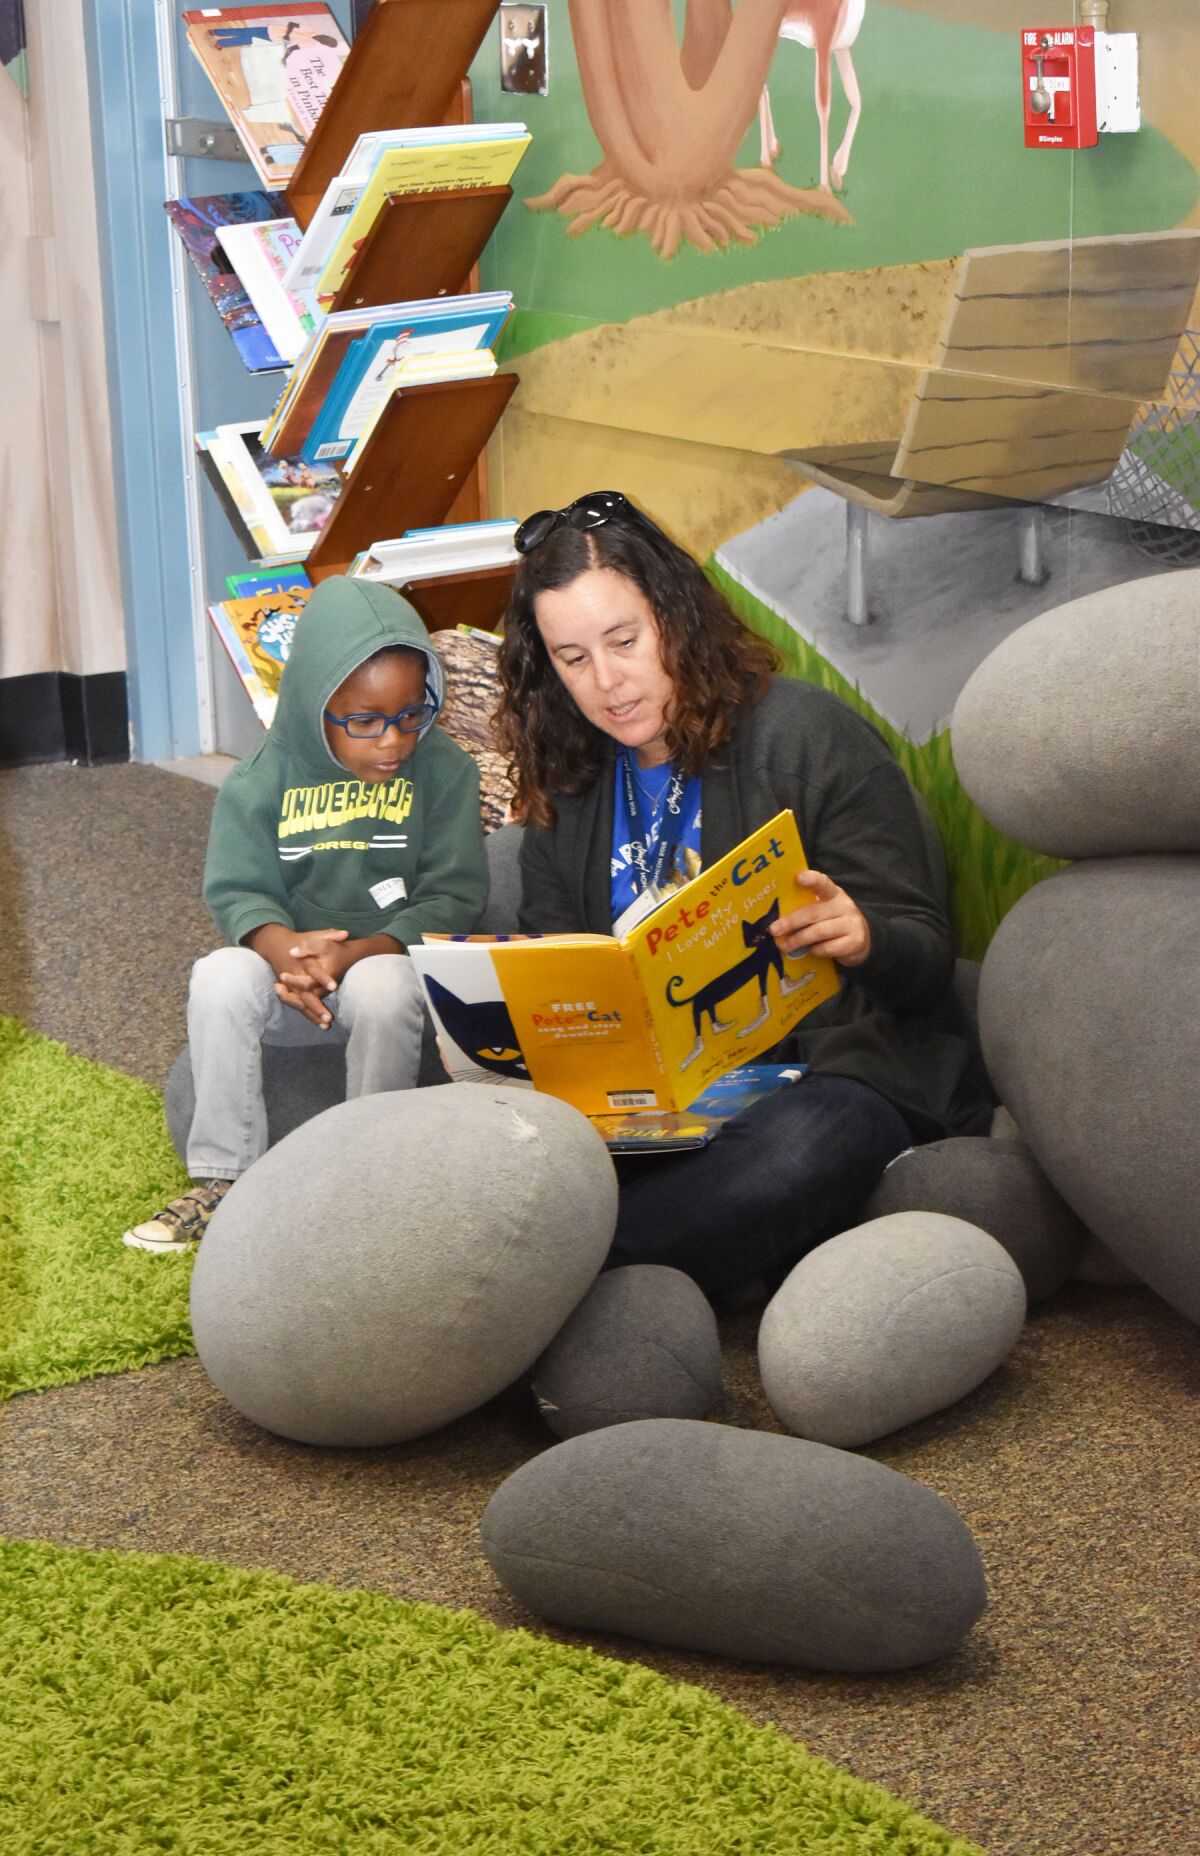 David and Corinne Rocha read together on the rock pillows in the new reading room.